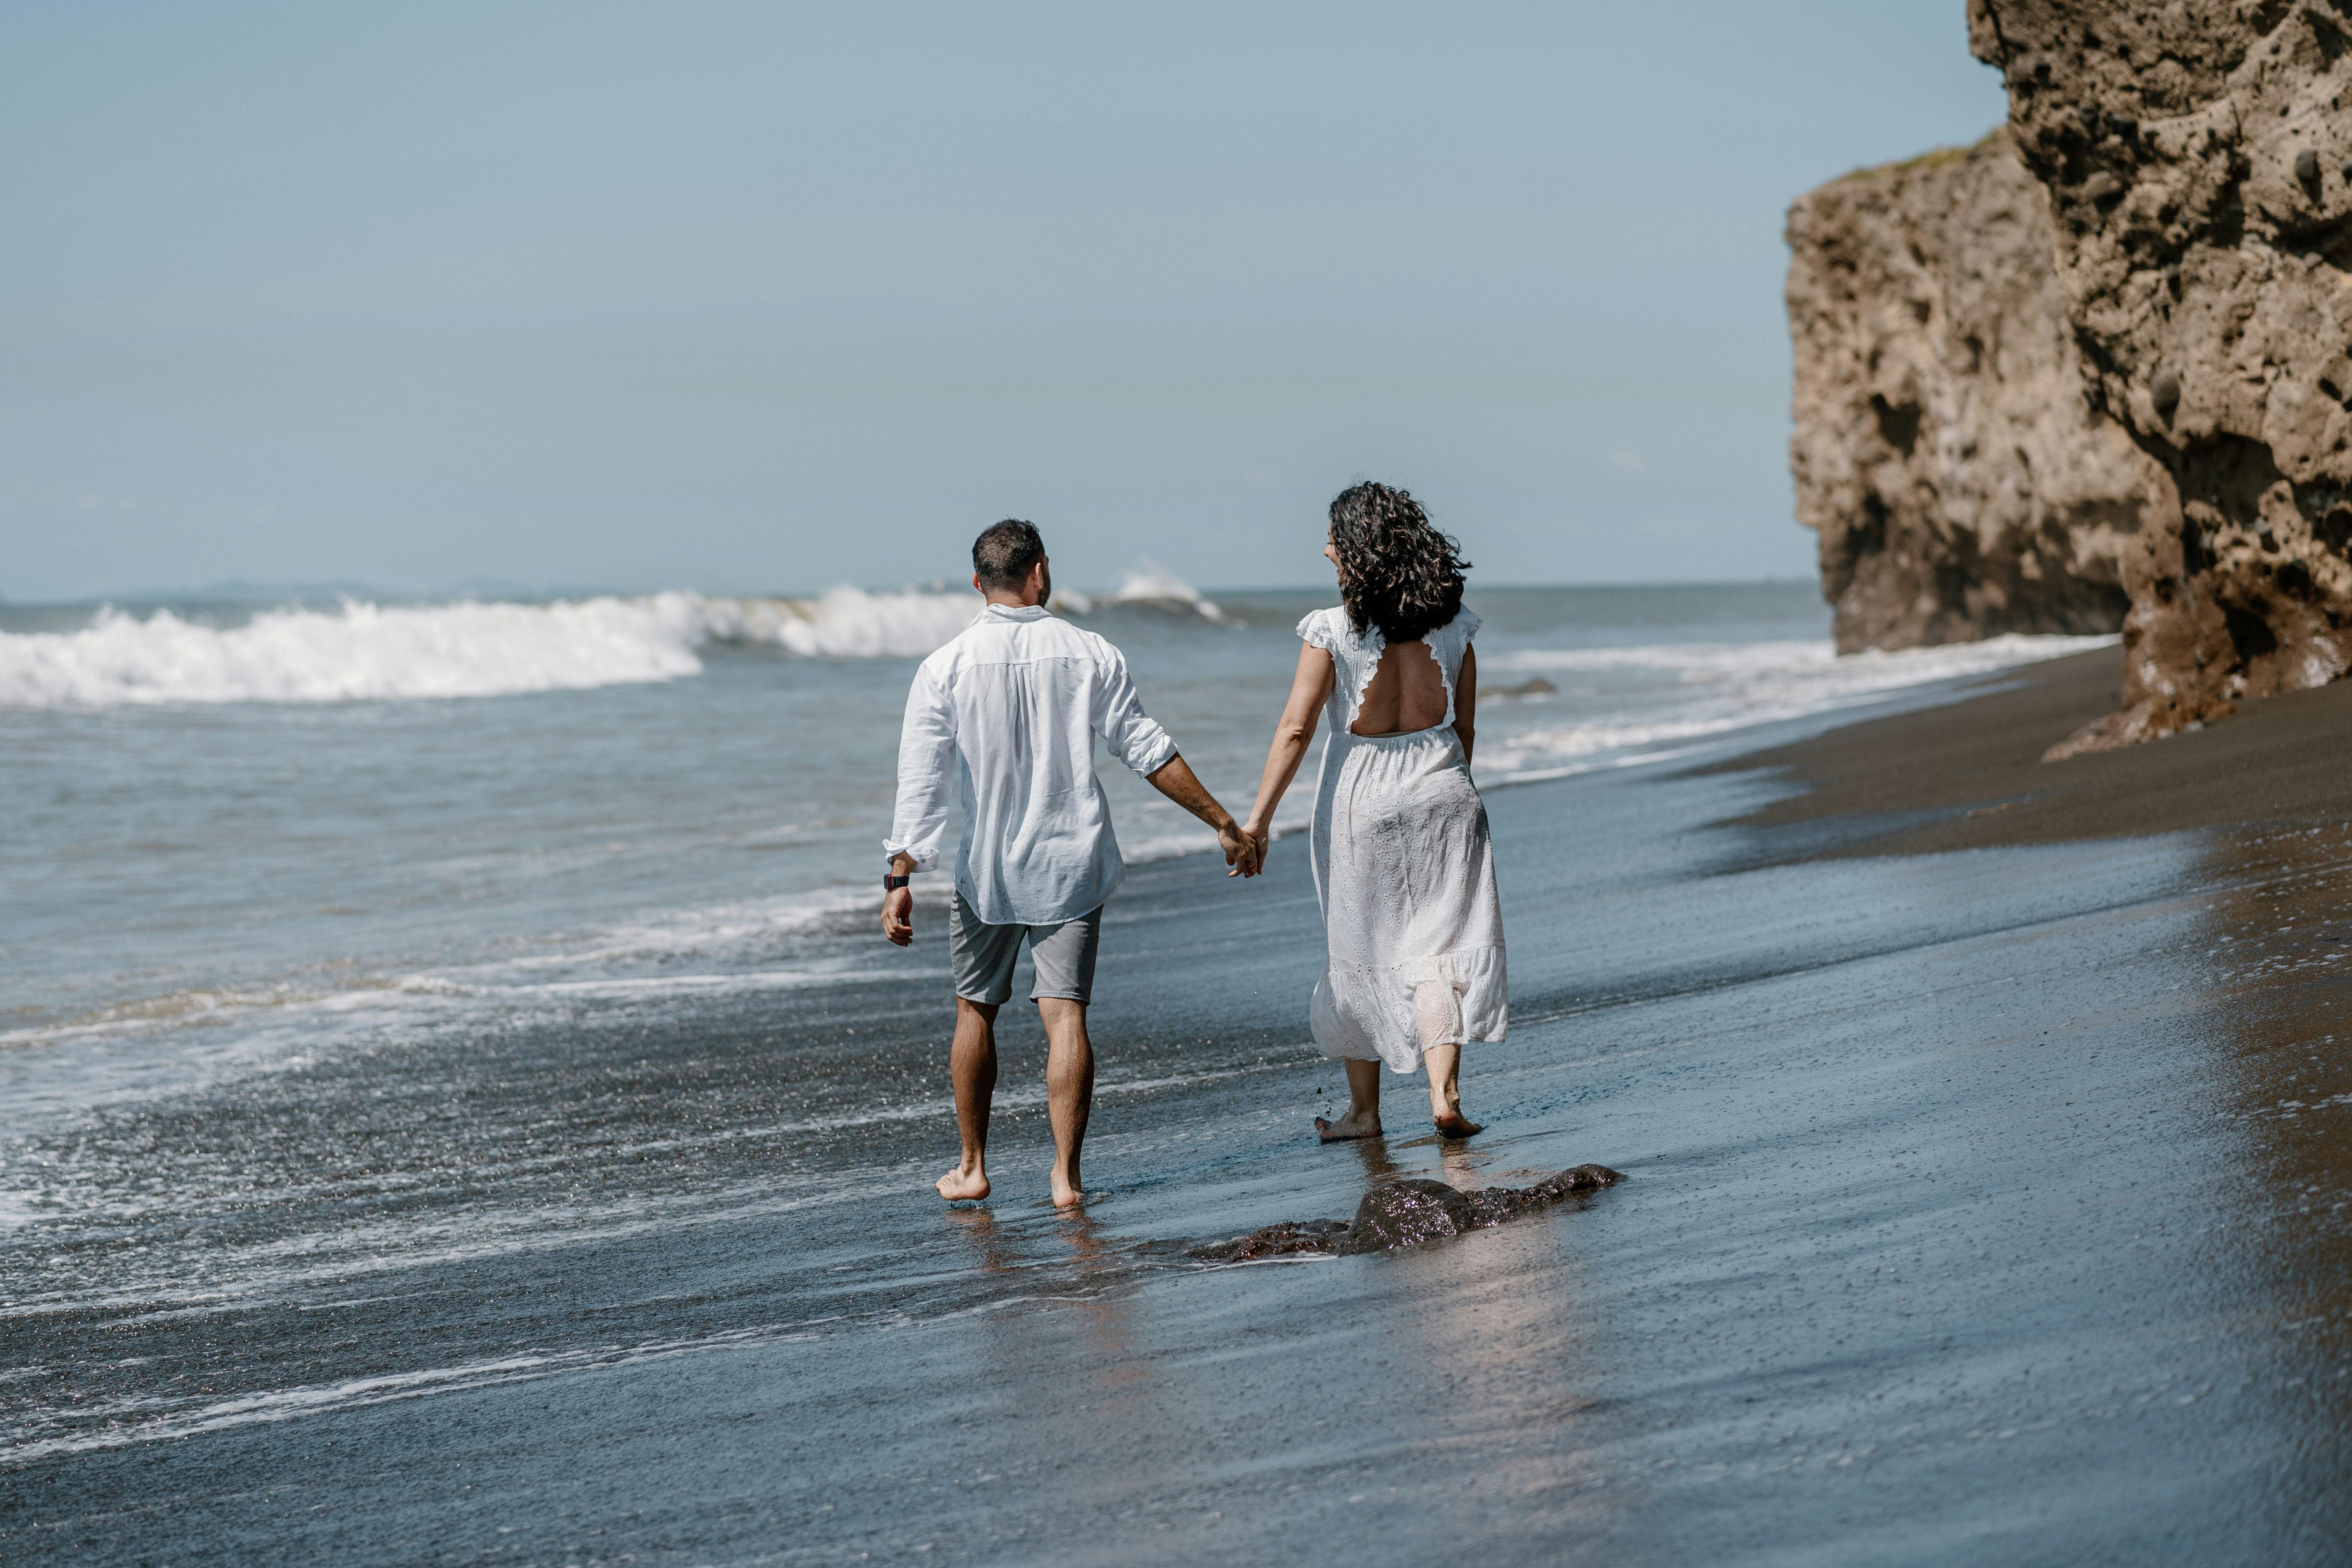 A couple holding hands on the beach | Source: Pexels